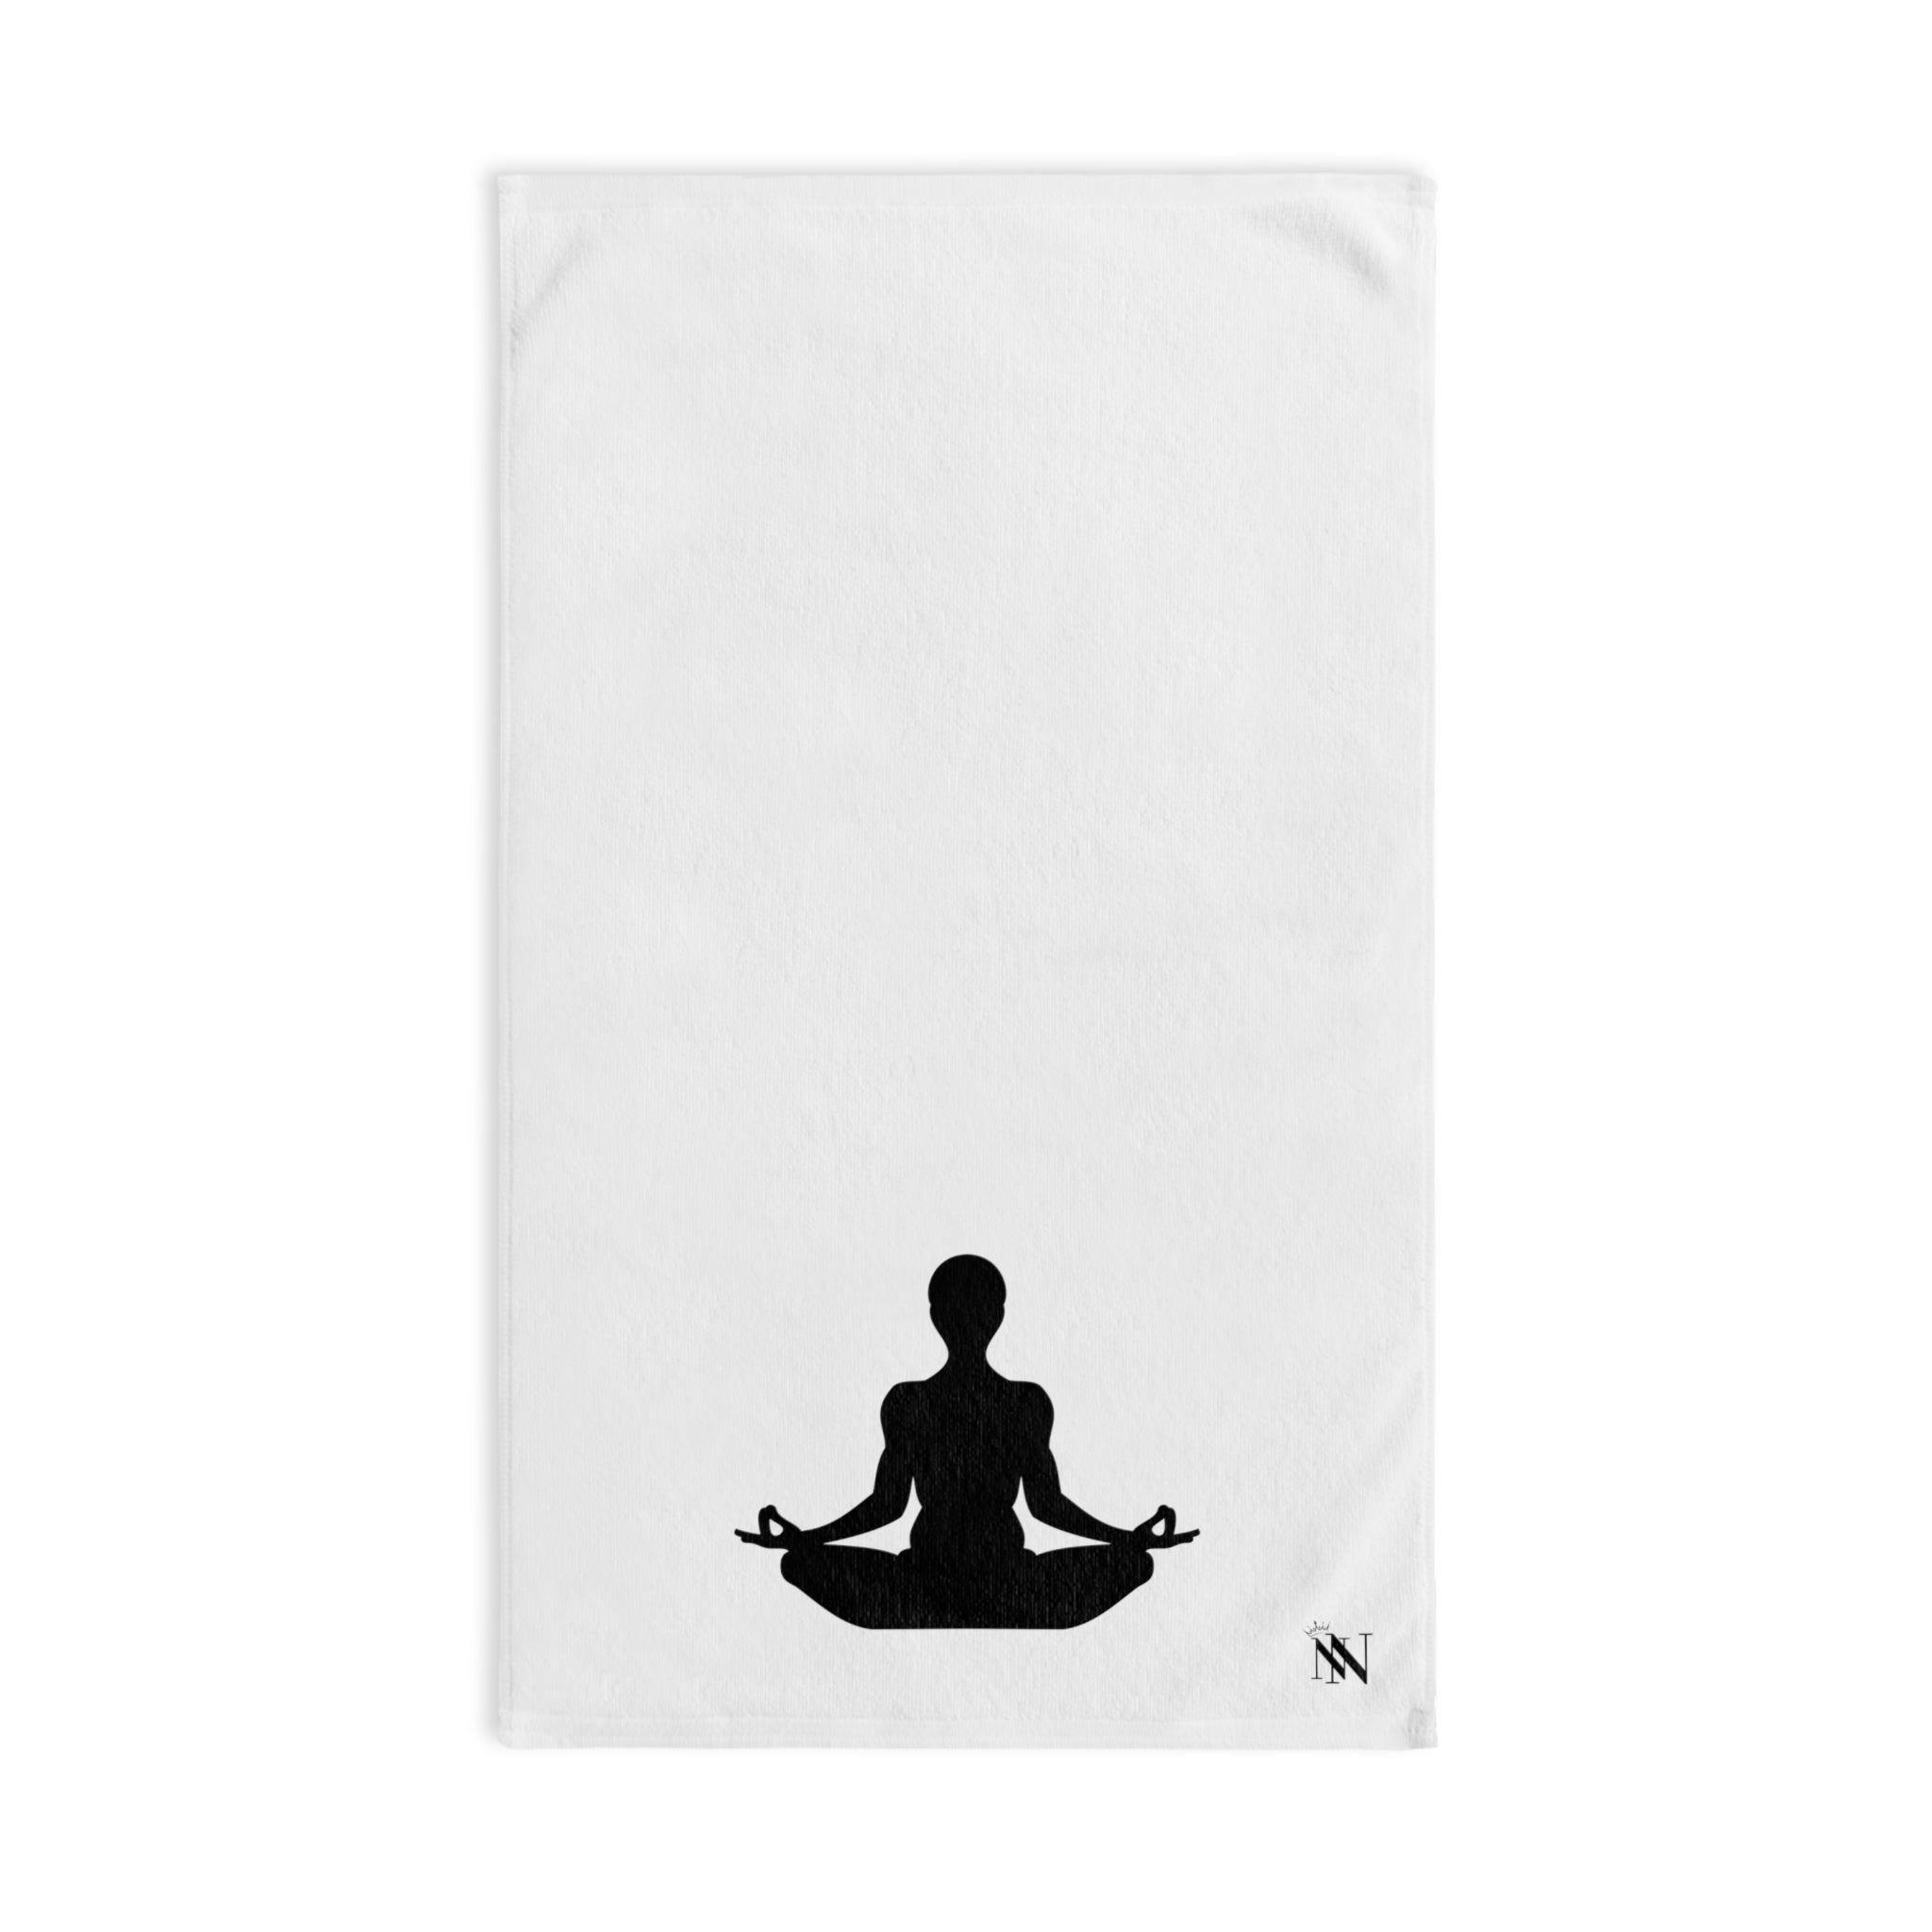 Yoga Seated MedWhite | Funny Gifts for Men - Gifts for Him - Birthday Gifts for Men, Him, Her, Husband, Boyfriend, Girlfriend, New Couple Gifts, Fathers & Valentines Day Gifts, Christmas Gifts NECTAR NAPKINS